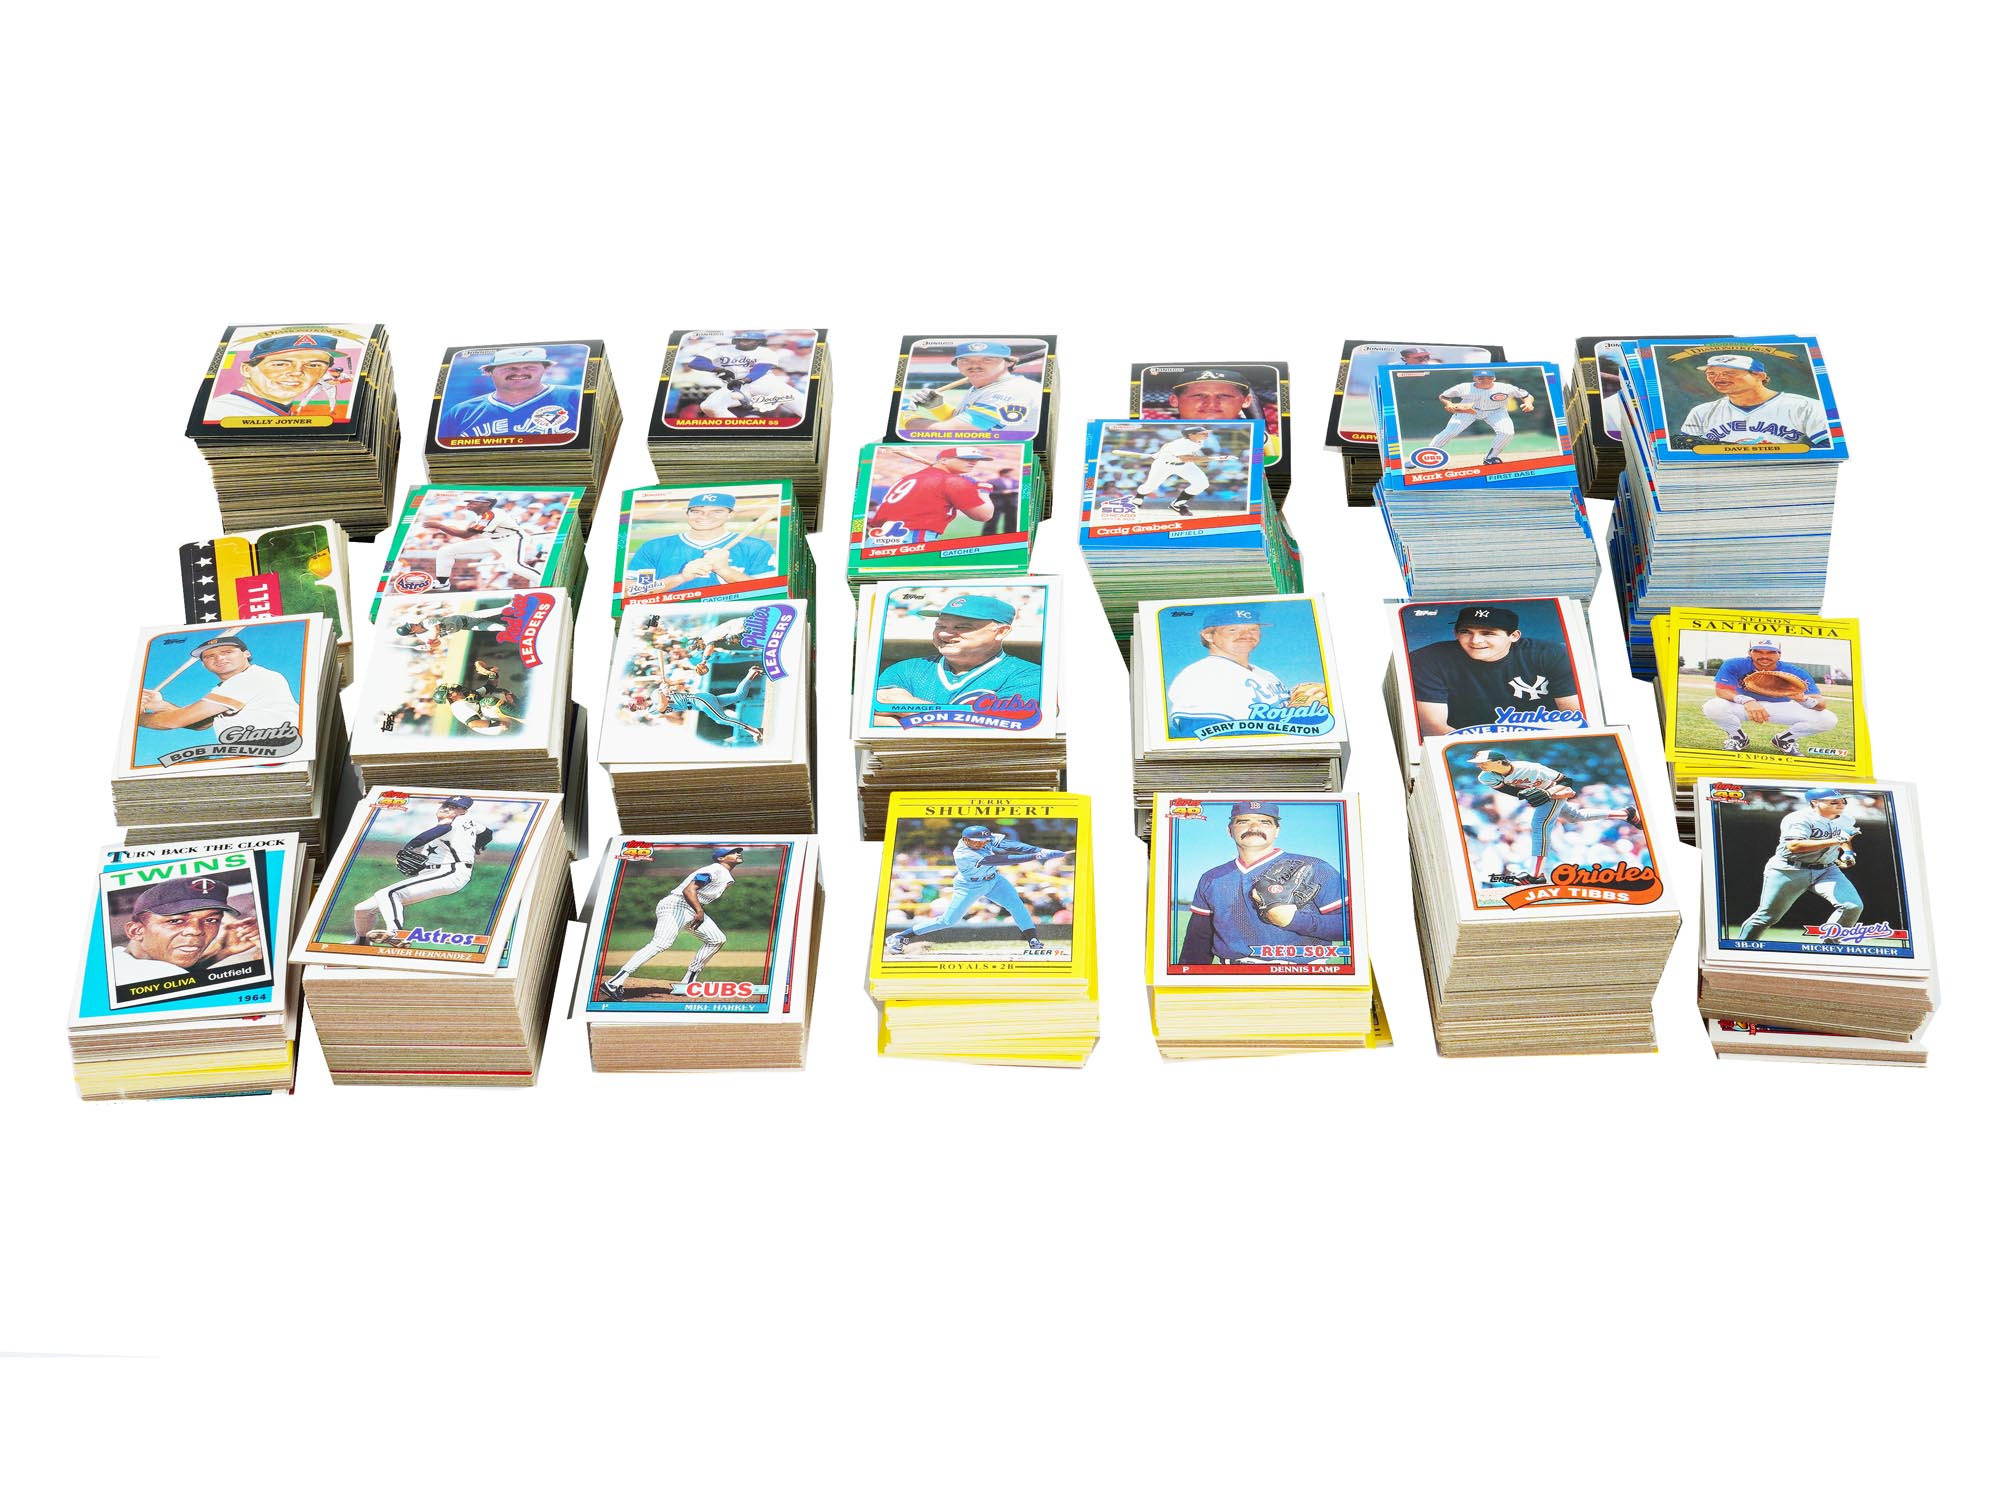 LARGE COLLECTION OF TOPPS FLEER DONRUSS BASEBALL CARDS PIC-0